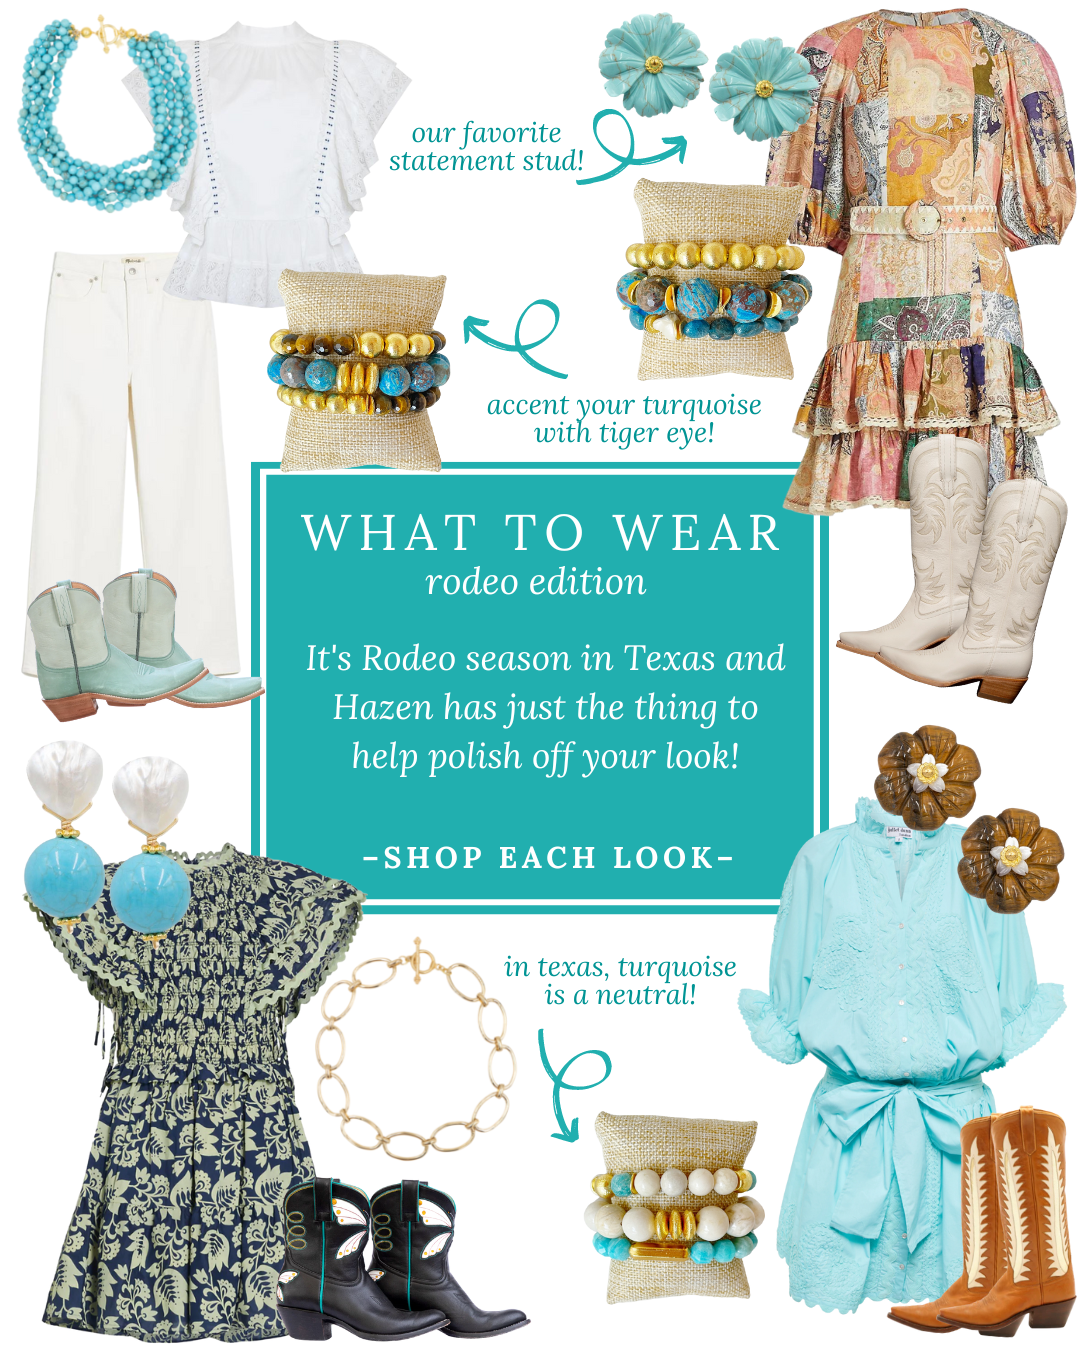 What to Wear: Rodeo Edition – Hazen & Co.